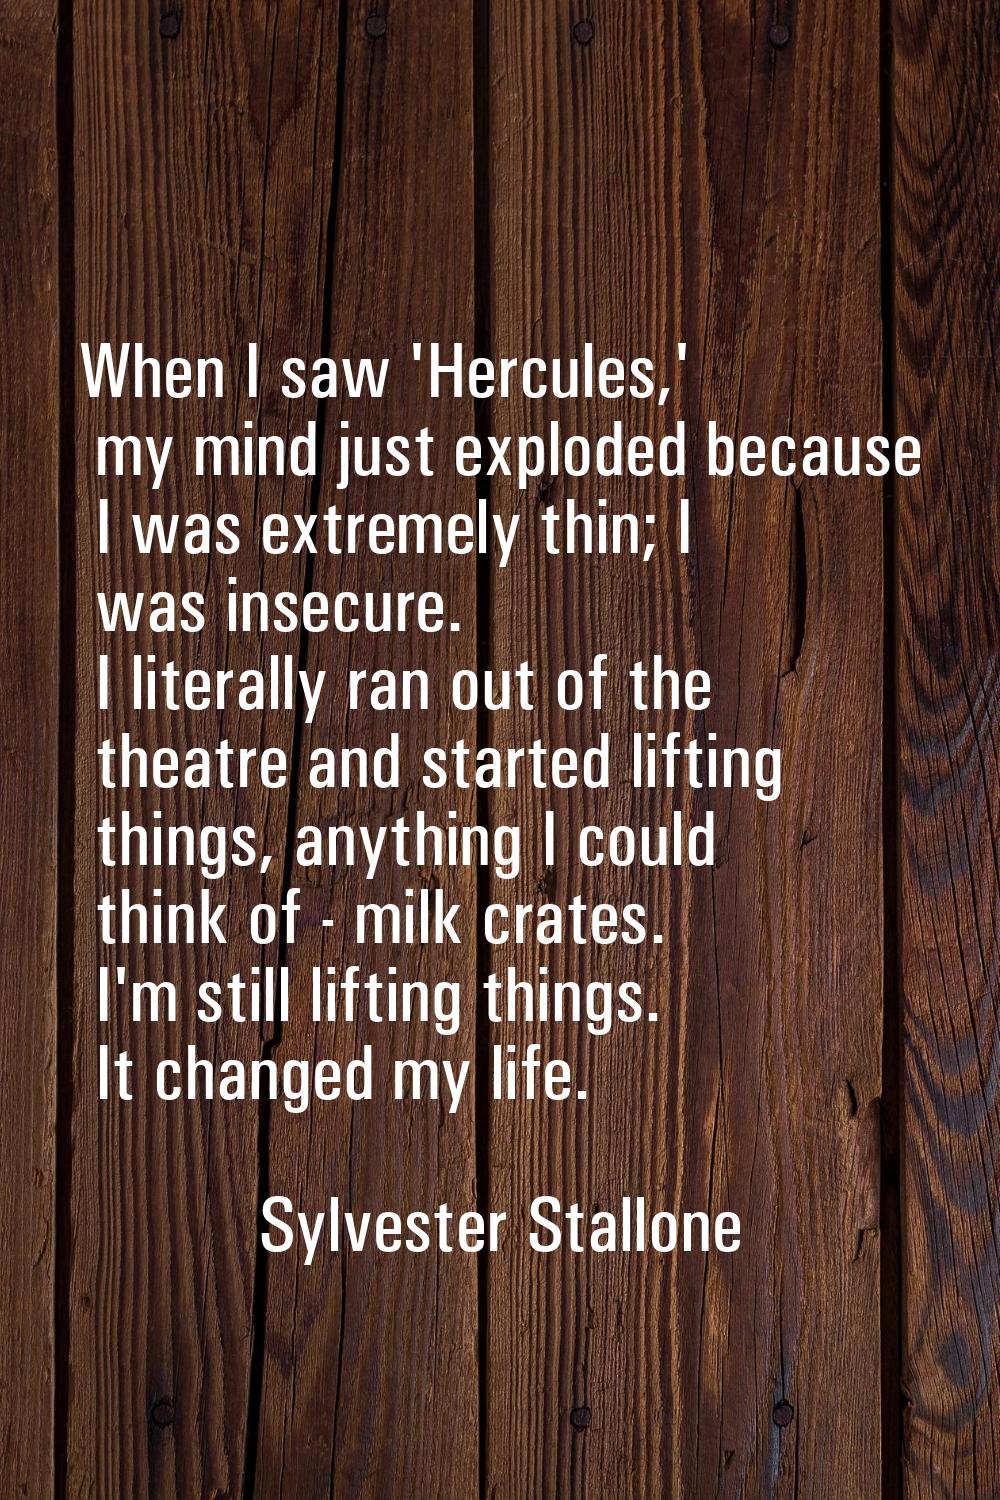 When I saw 'Hercules,' my mind just exploded because I was extremely thin; I was insecure. I litera